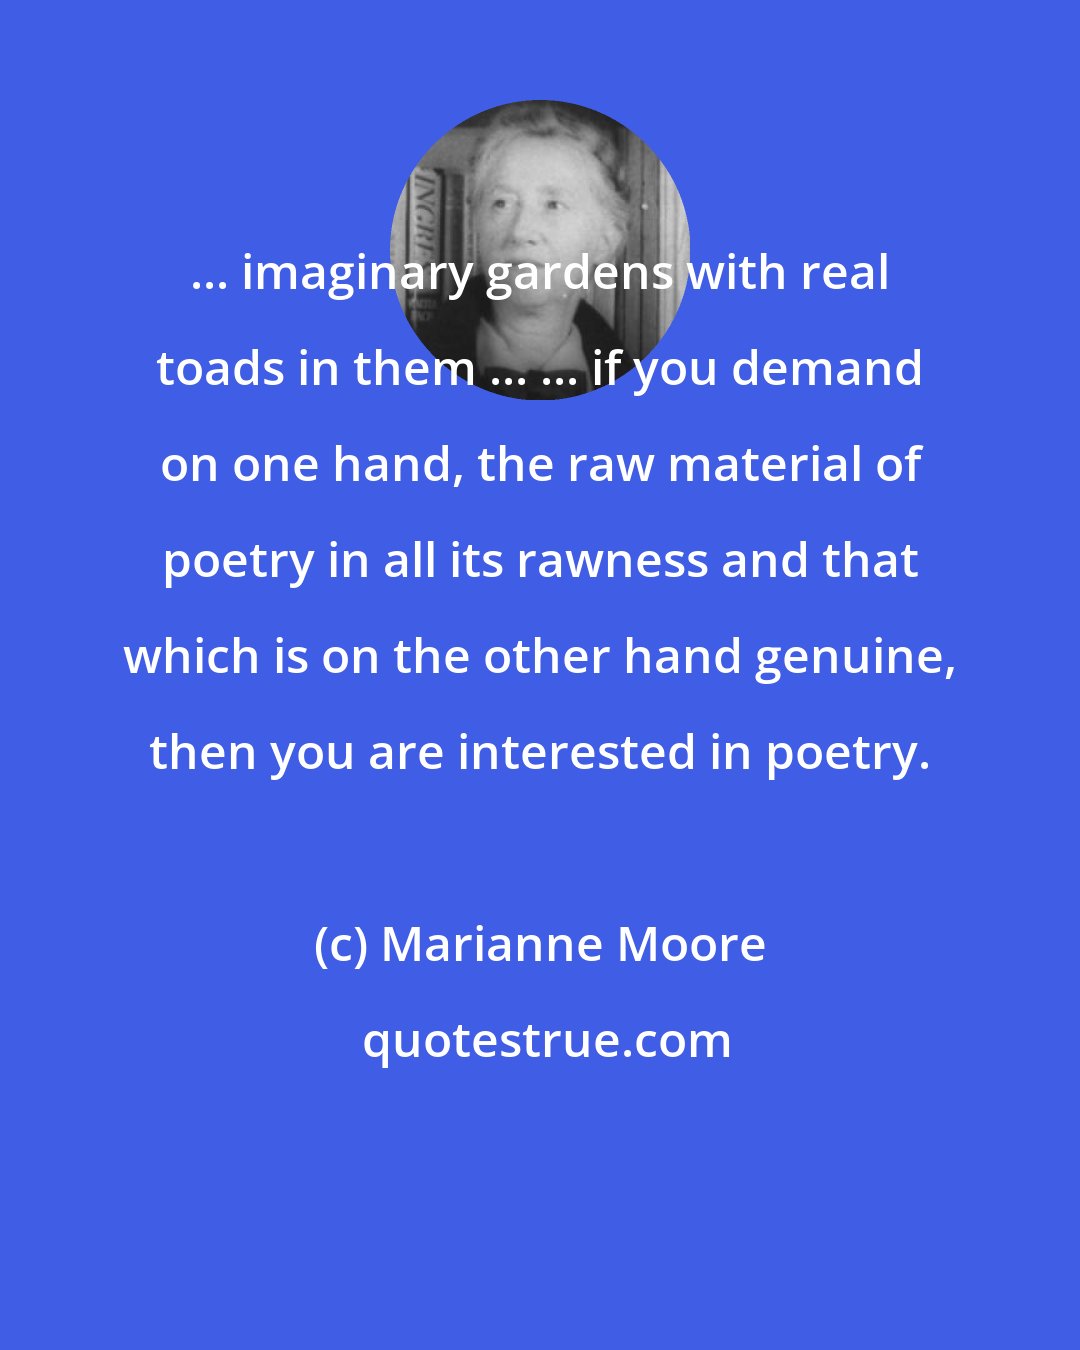 Marianne Moore: ... imaginary gardens with real toads in them ... ... if you demand on one hand, the raw material of poetry in all its rawness and that which is on the other hand genuine, then you are interested in poetry.